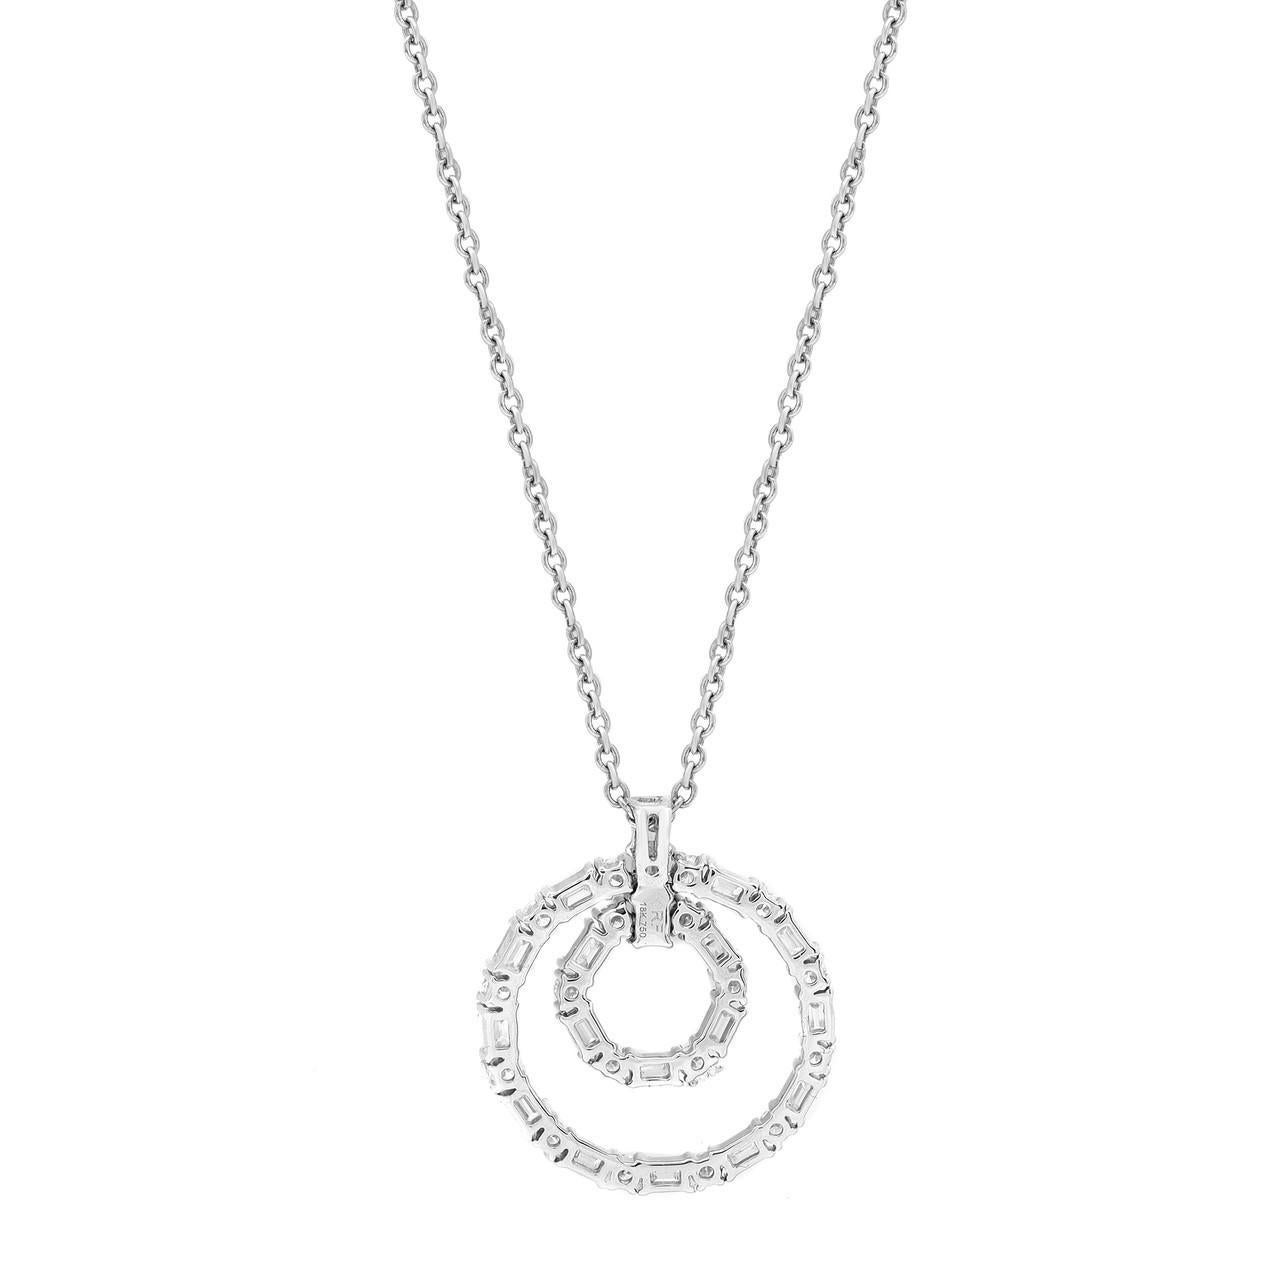 Modern 1.73 Carat Diamond Circle Pendant Necklace in 18K White Gold For Sale